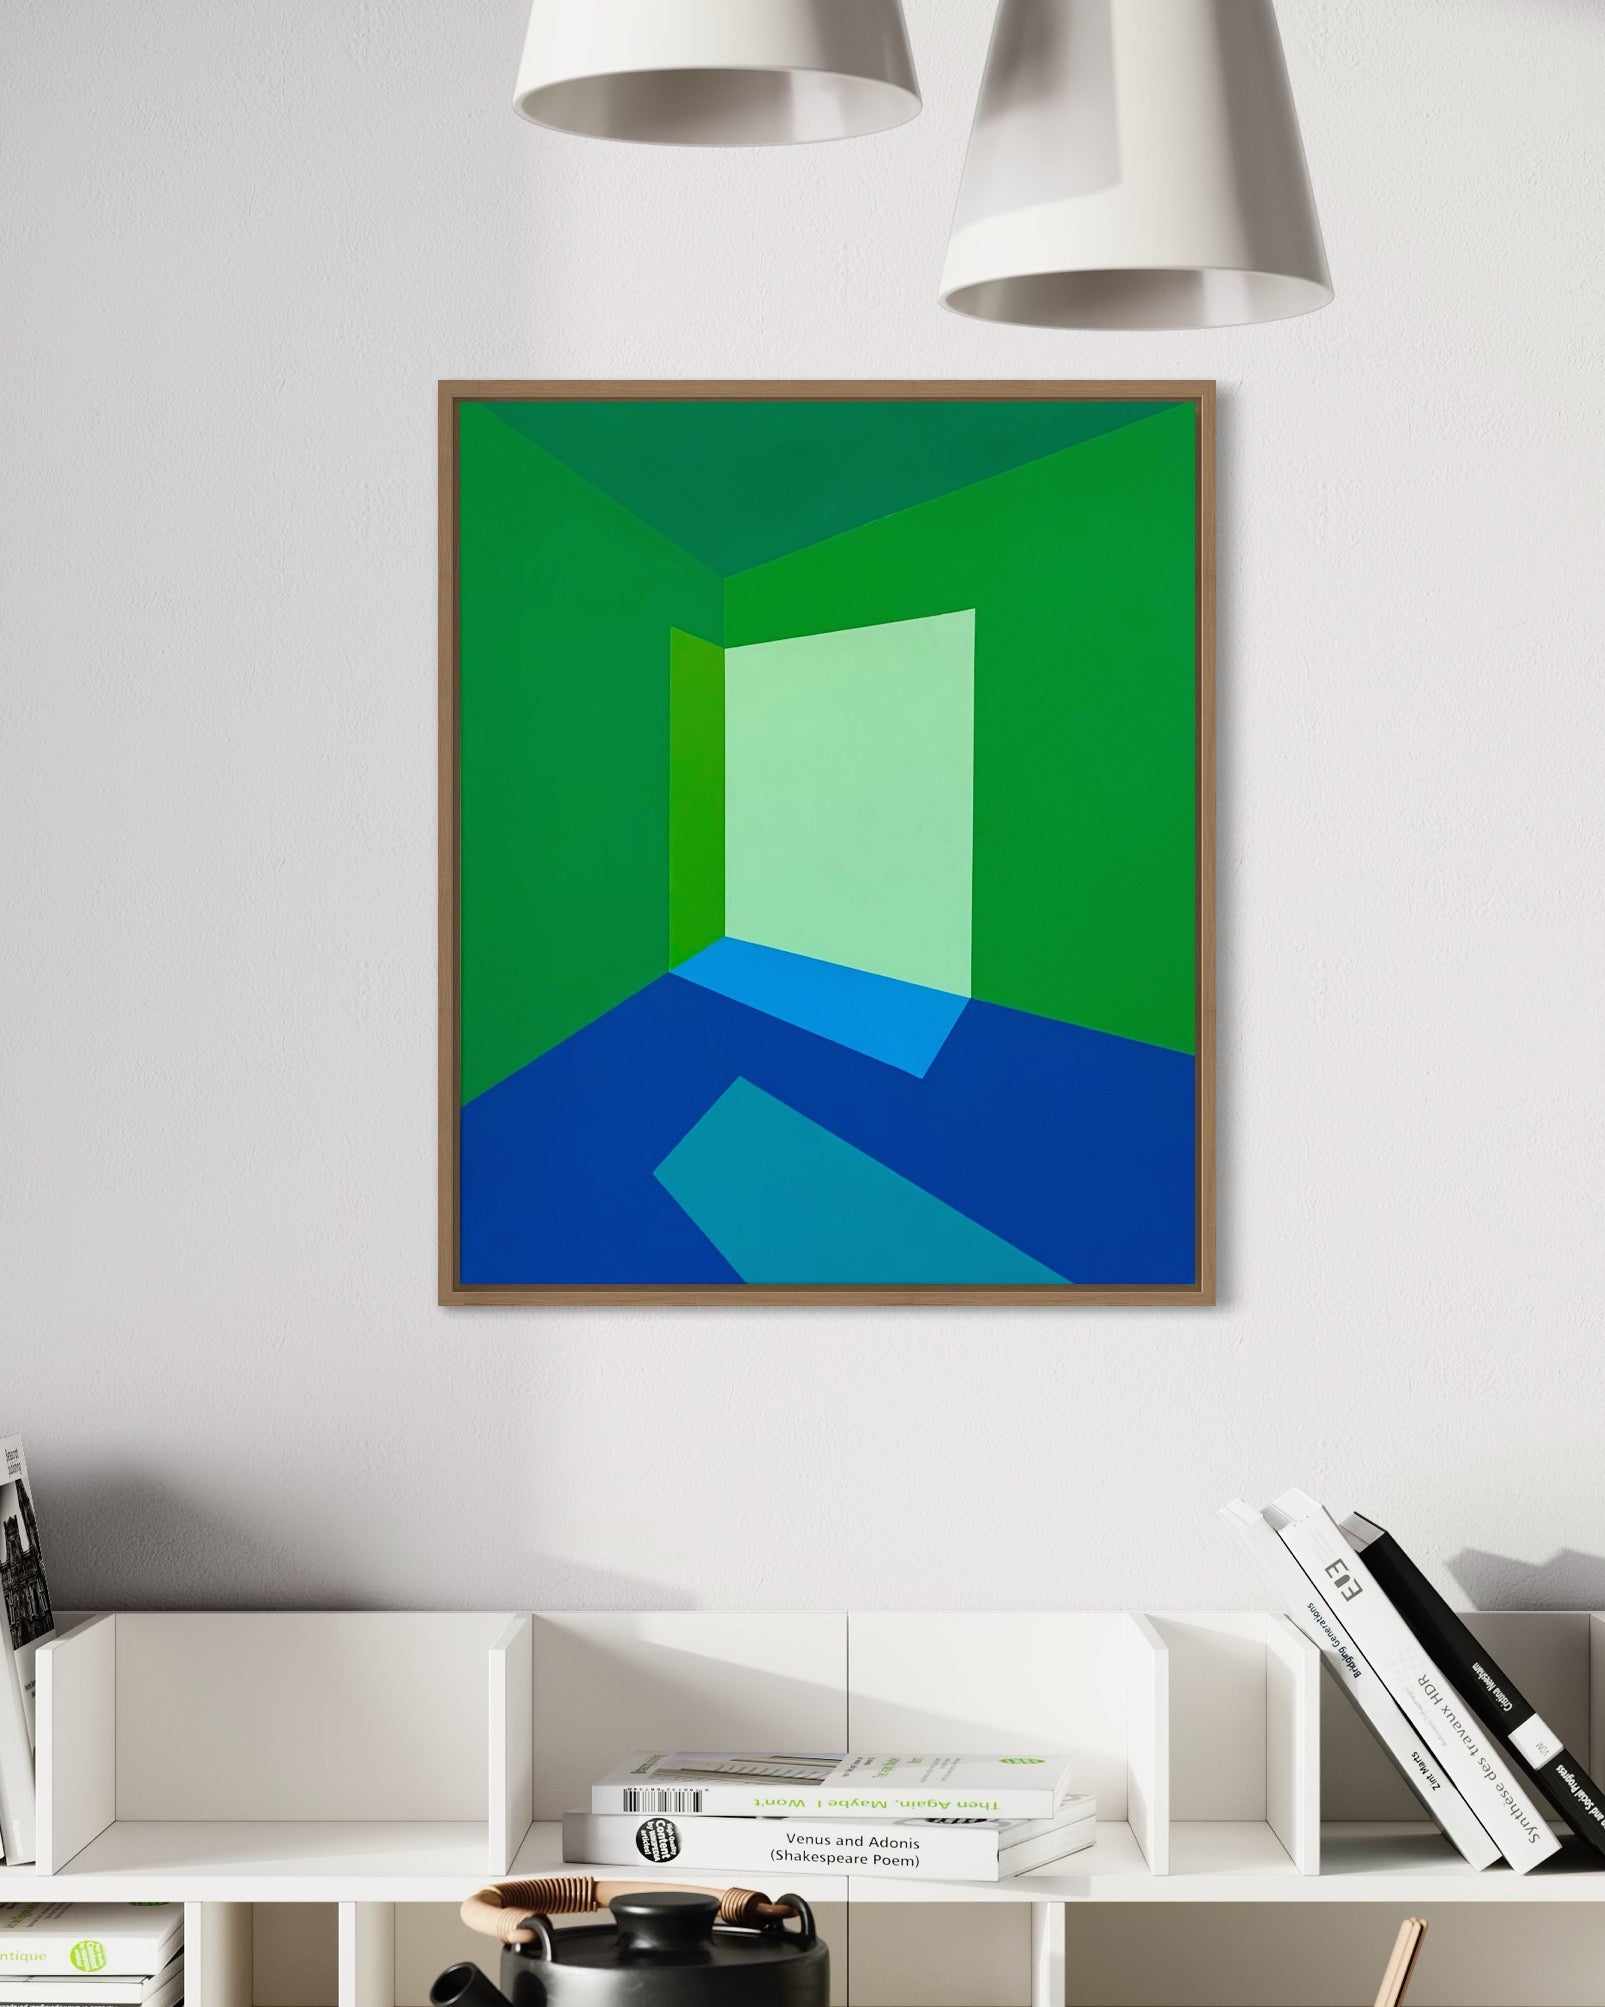 Light in the Cool - Original Painting on Canvas, 20" x 22" (50.8x55.88cm)